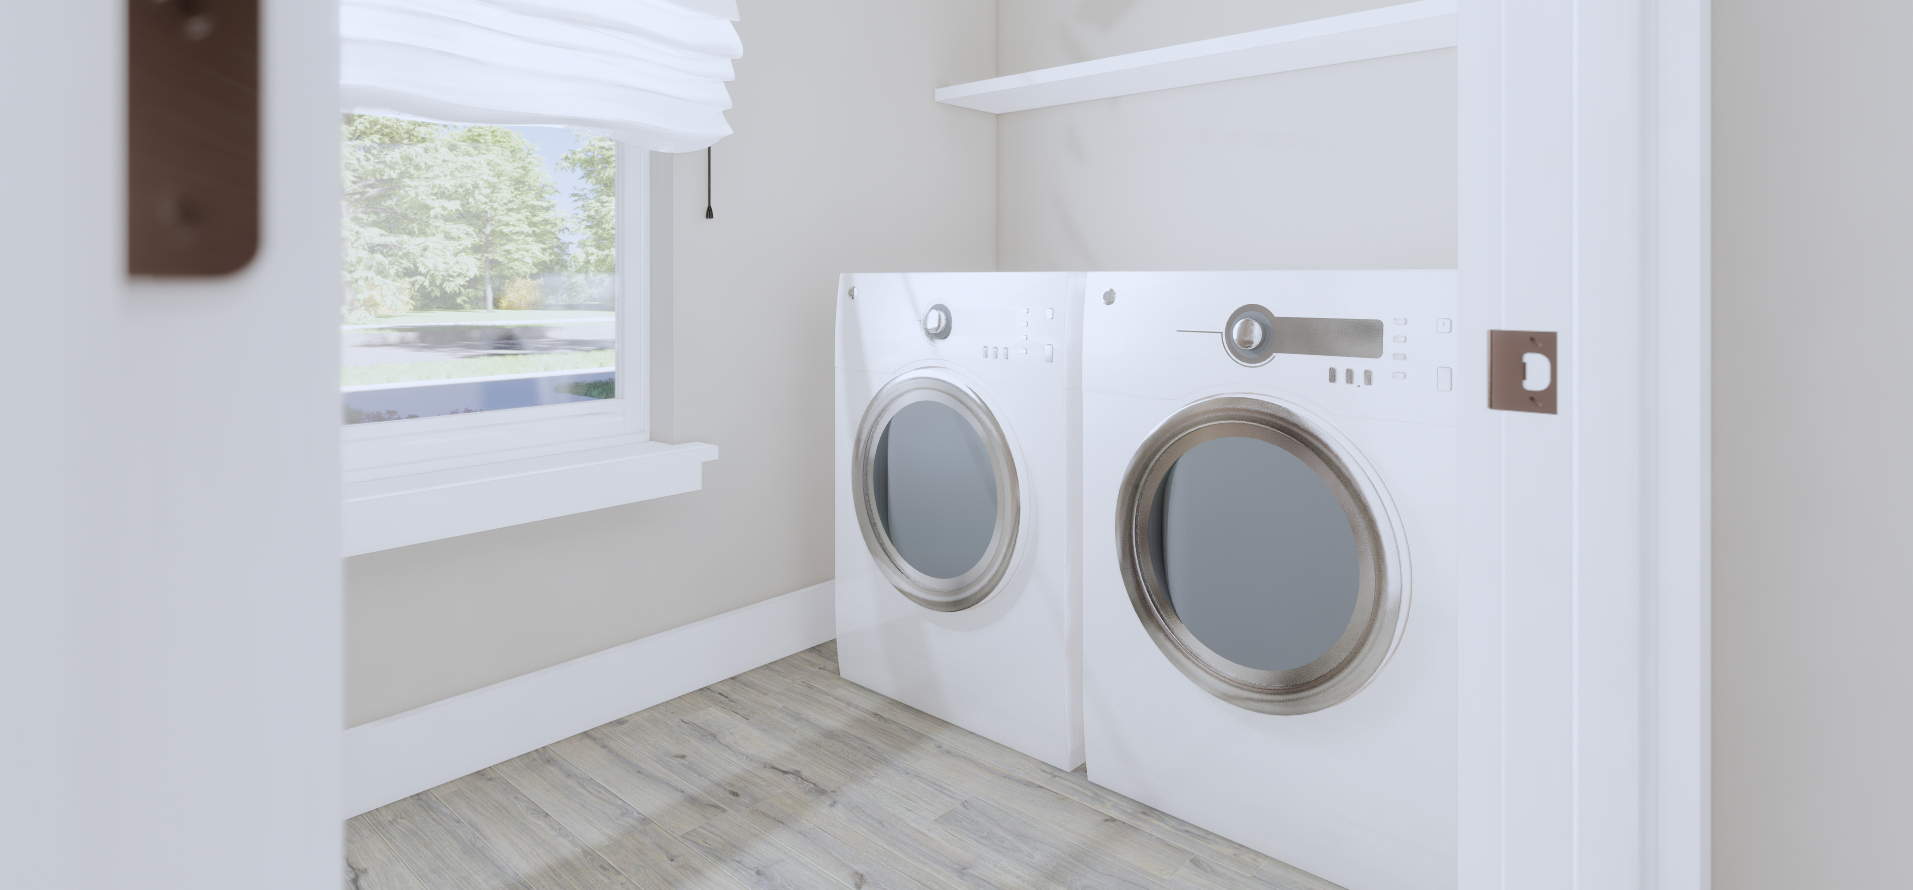 13- The New Must-Haves for Today's Home - The Upstairs Laundry Room